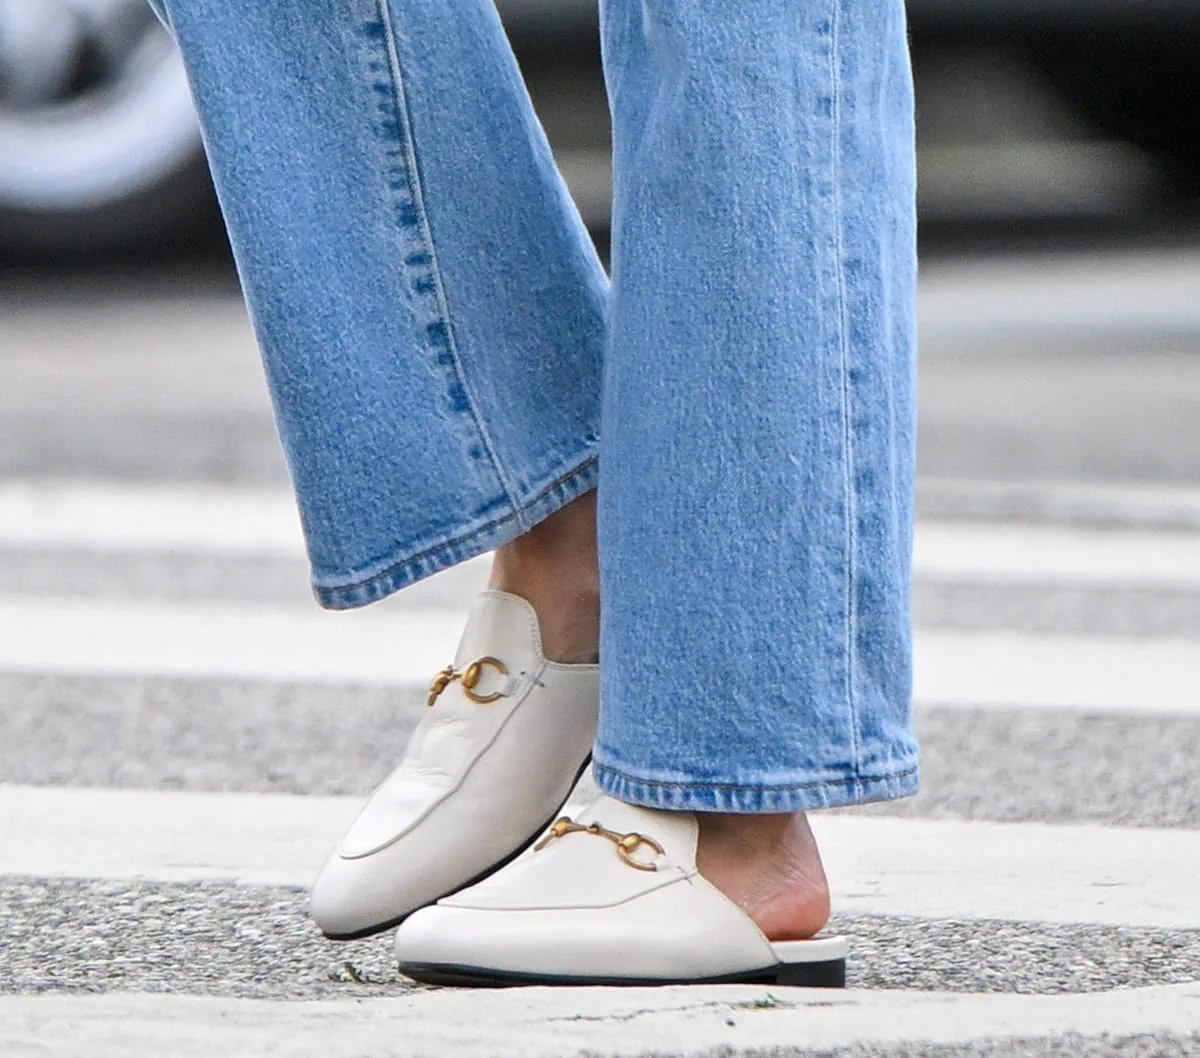 Lucy Hale wears the iconic, celebrity-favorite Gucci Princetown mules in white leather